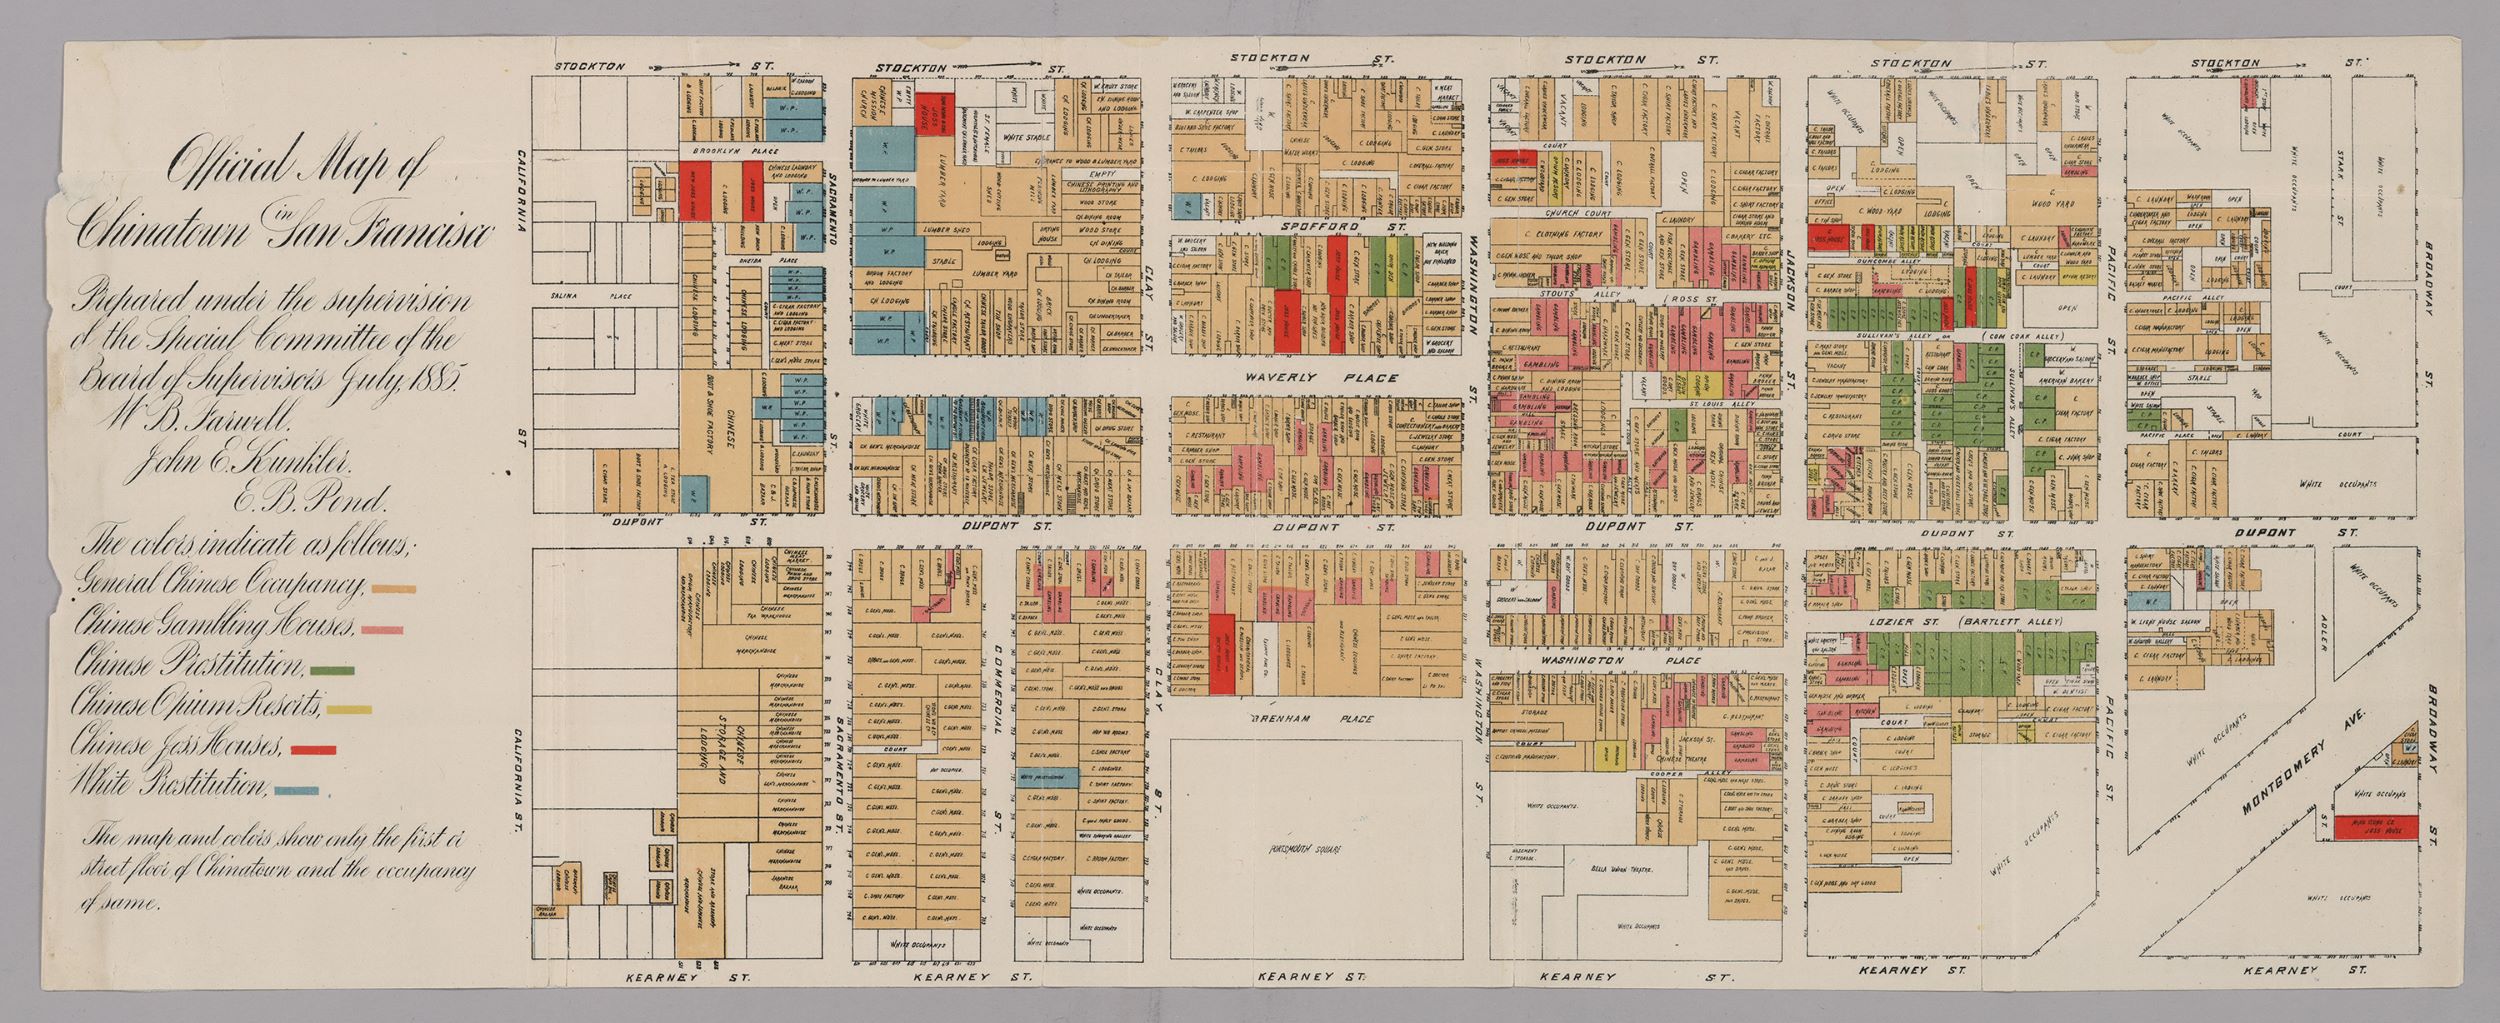 City map in a horizontal format, with buildings designated in orange, red, blue, green, and pink. The legend on the left is titled "Official Map of / Chinatown San Francisco"